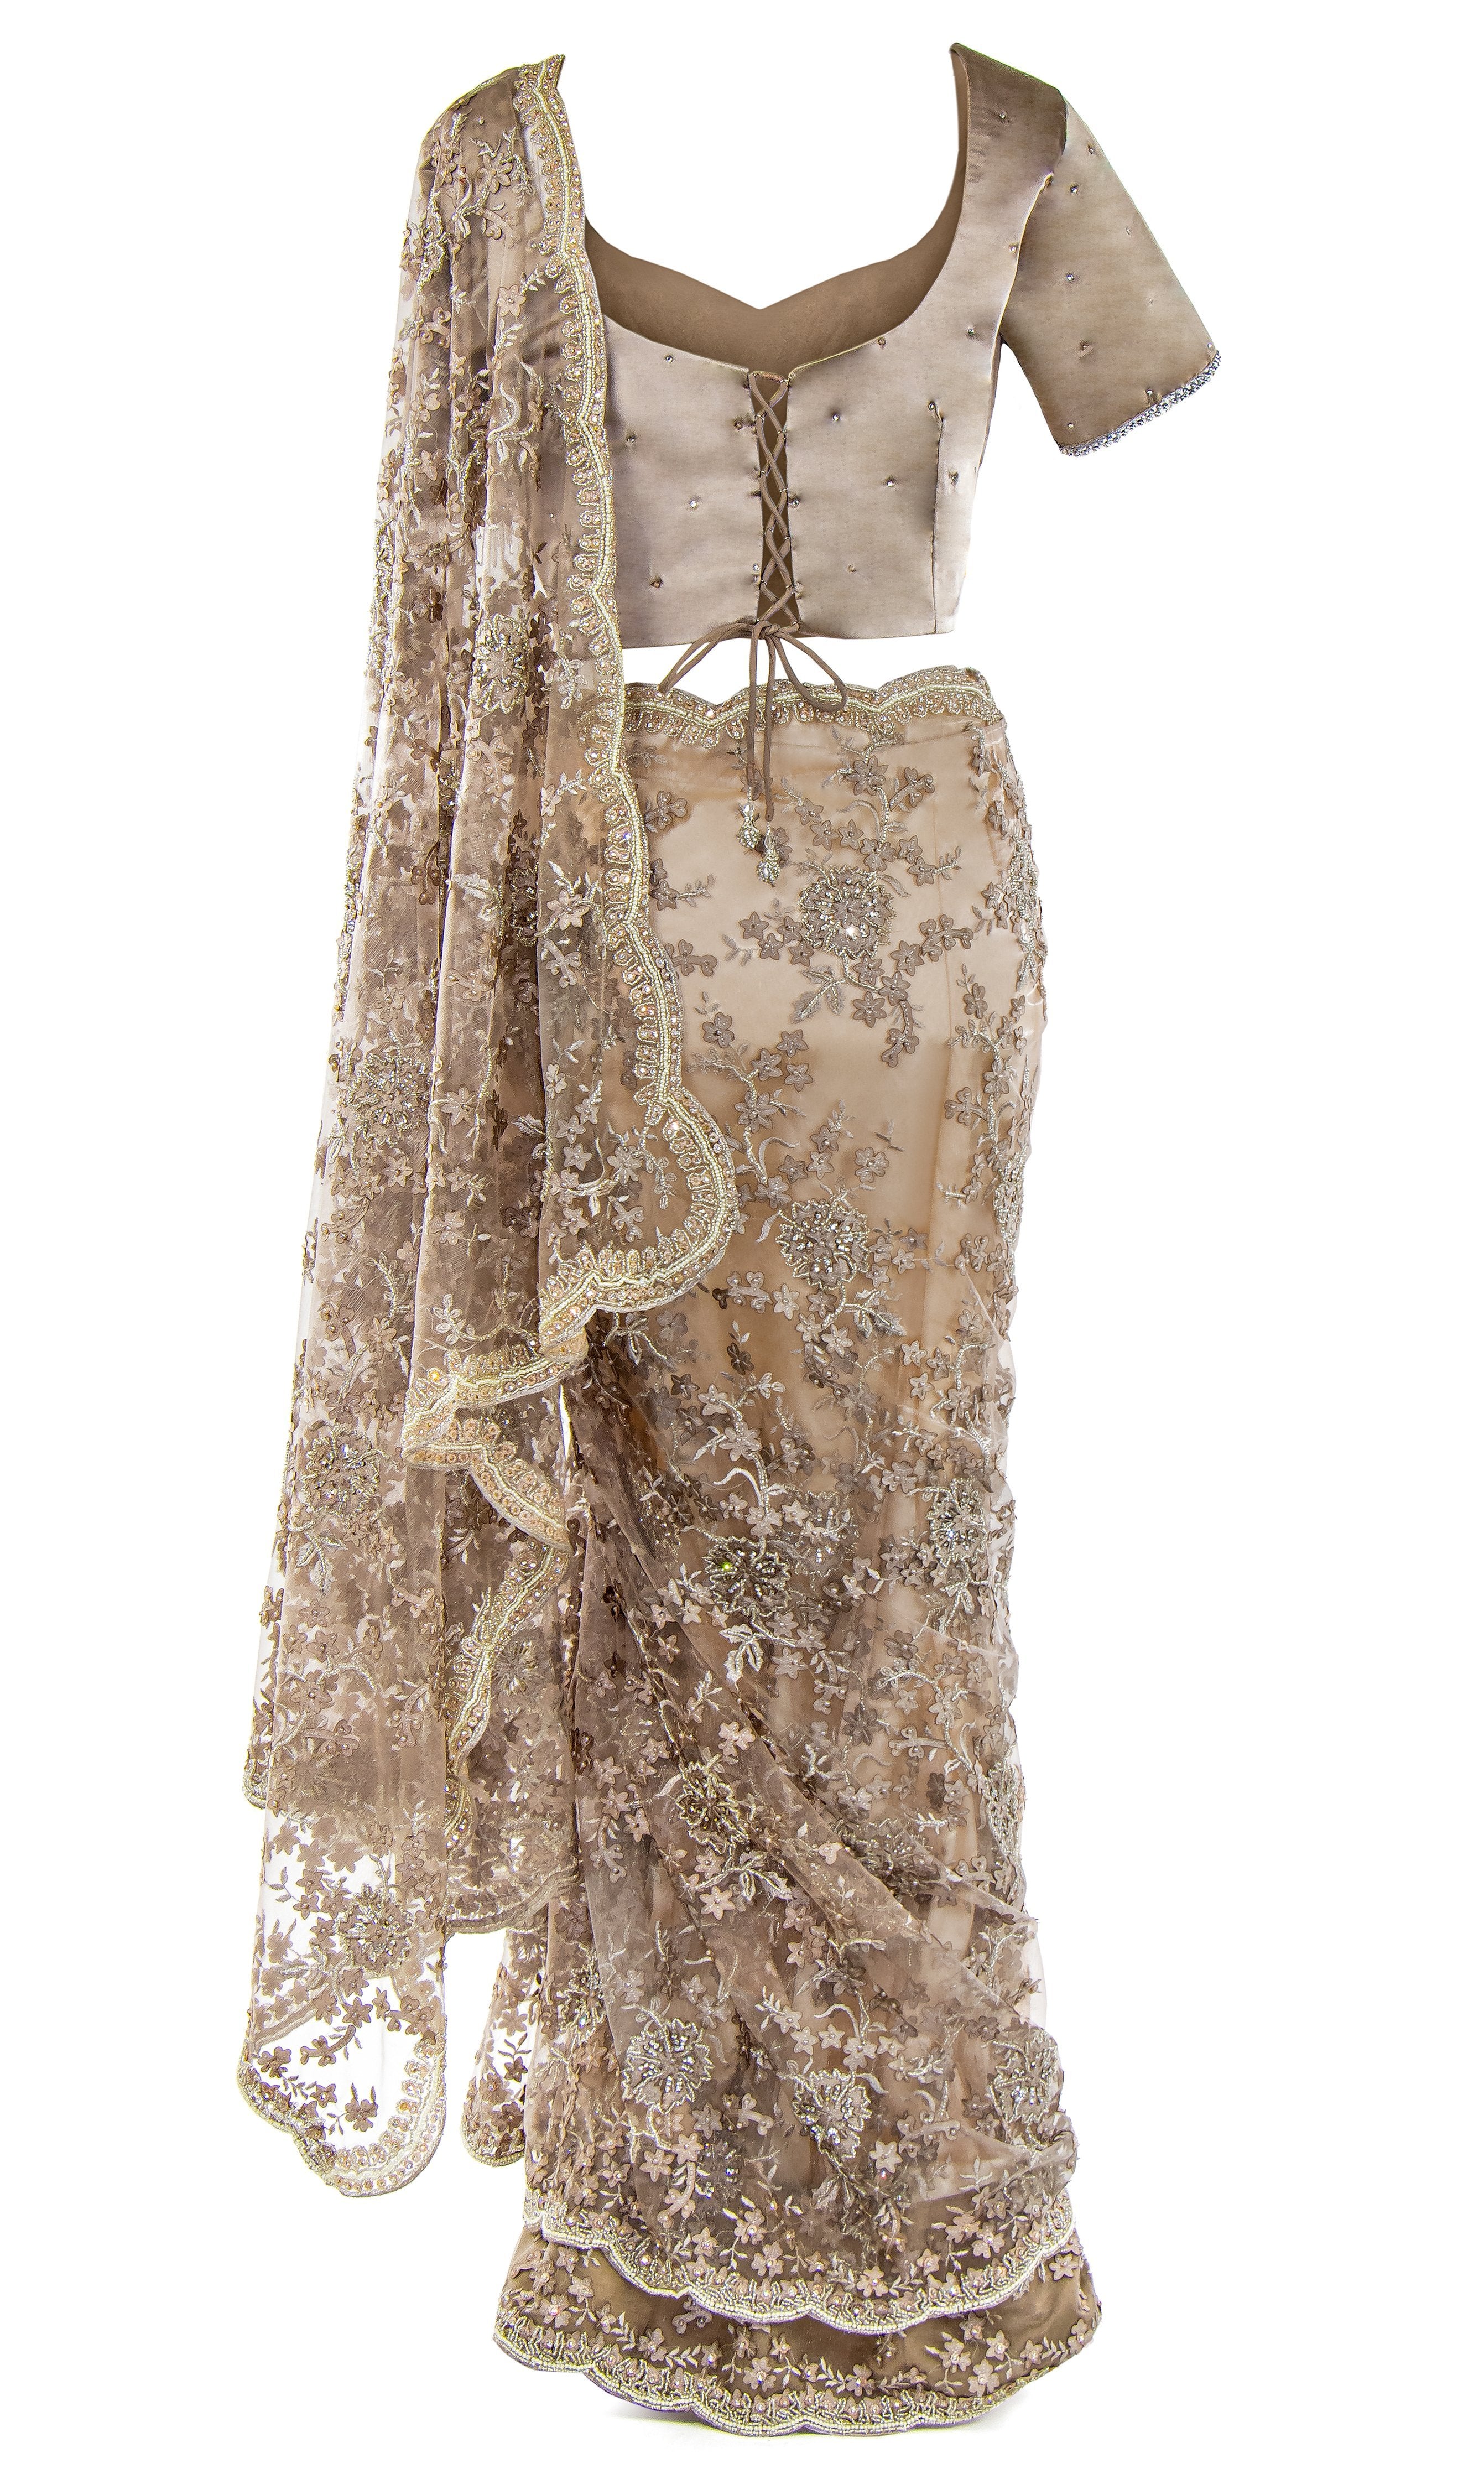 Classic Taupe Silk Saree pre-pleated for your convenience, petticoat is included, Perfect for any occasion.